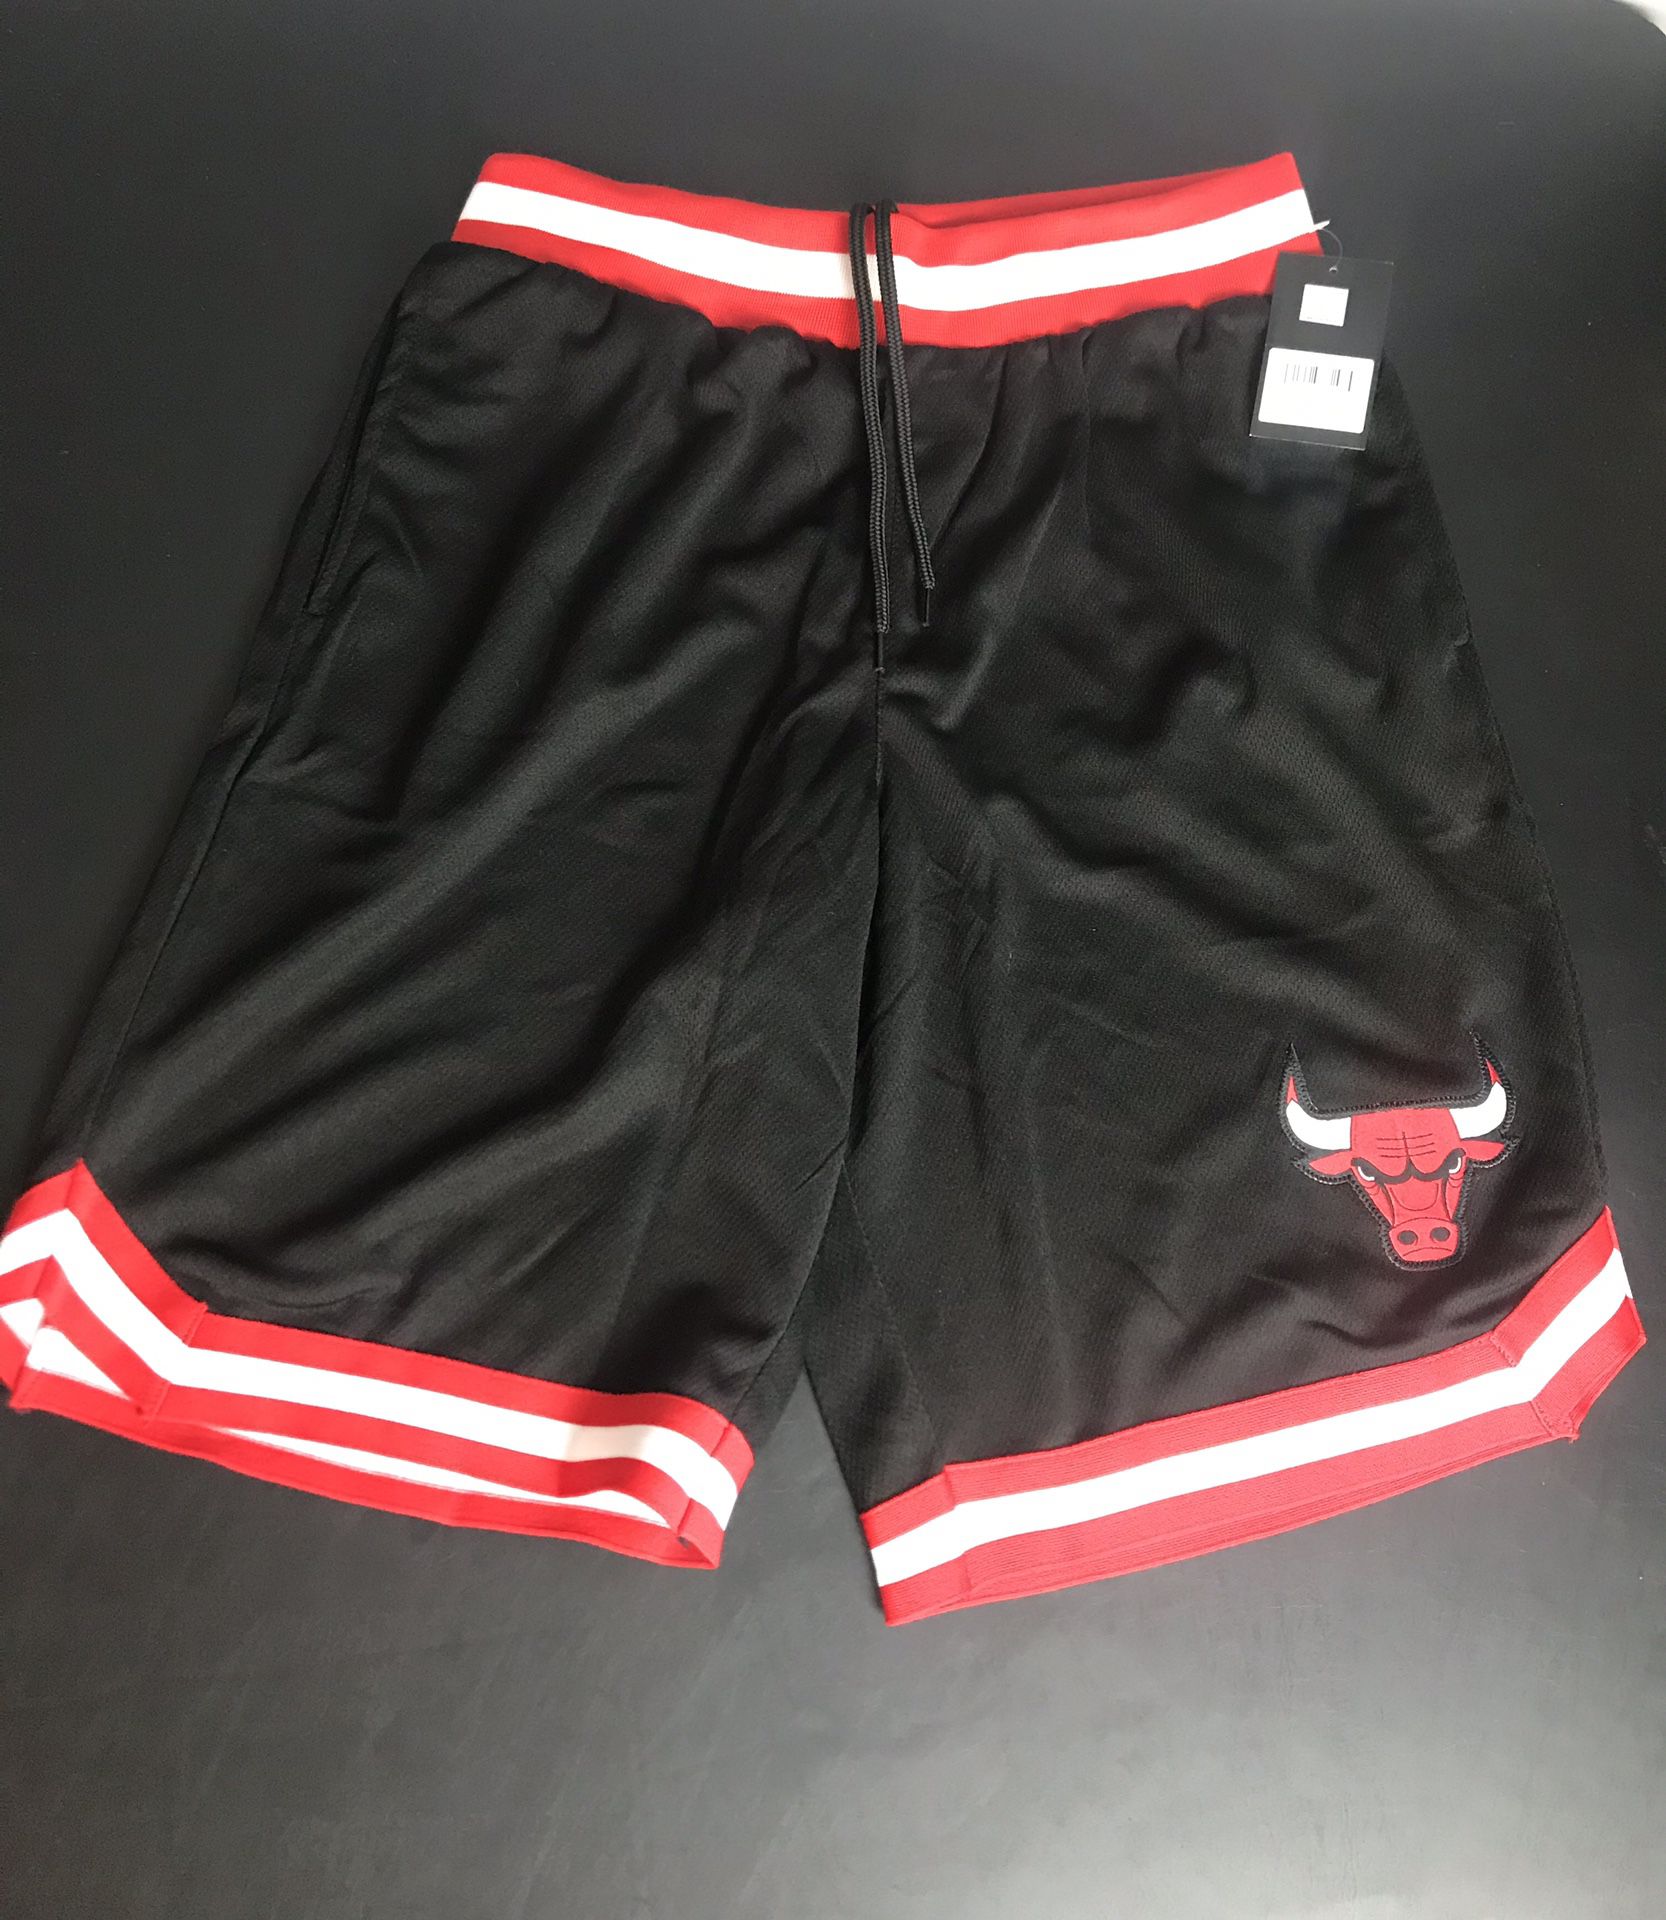 Chicago Bulls NBA Basketball Shorts Black Red Stitched Size Medium NEW with tags